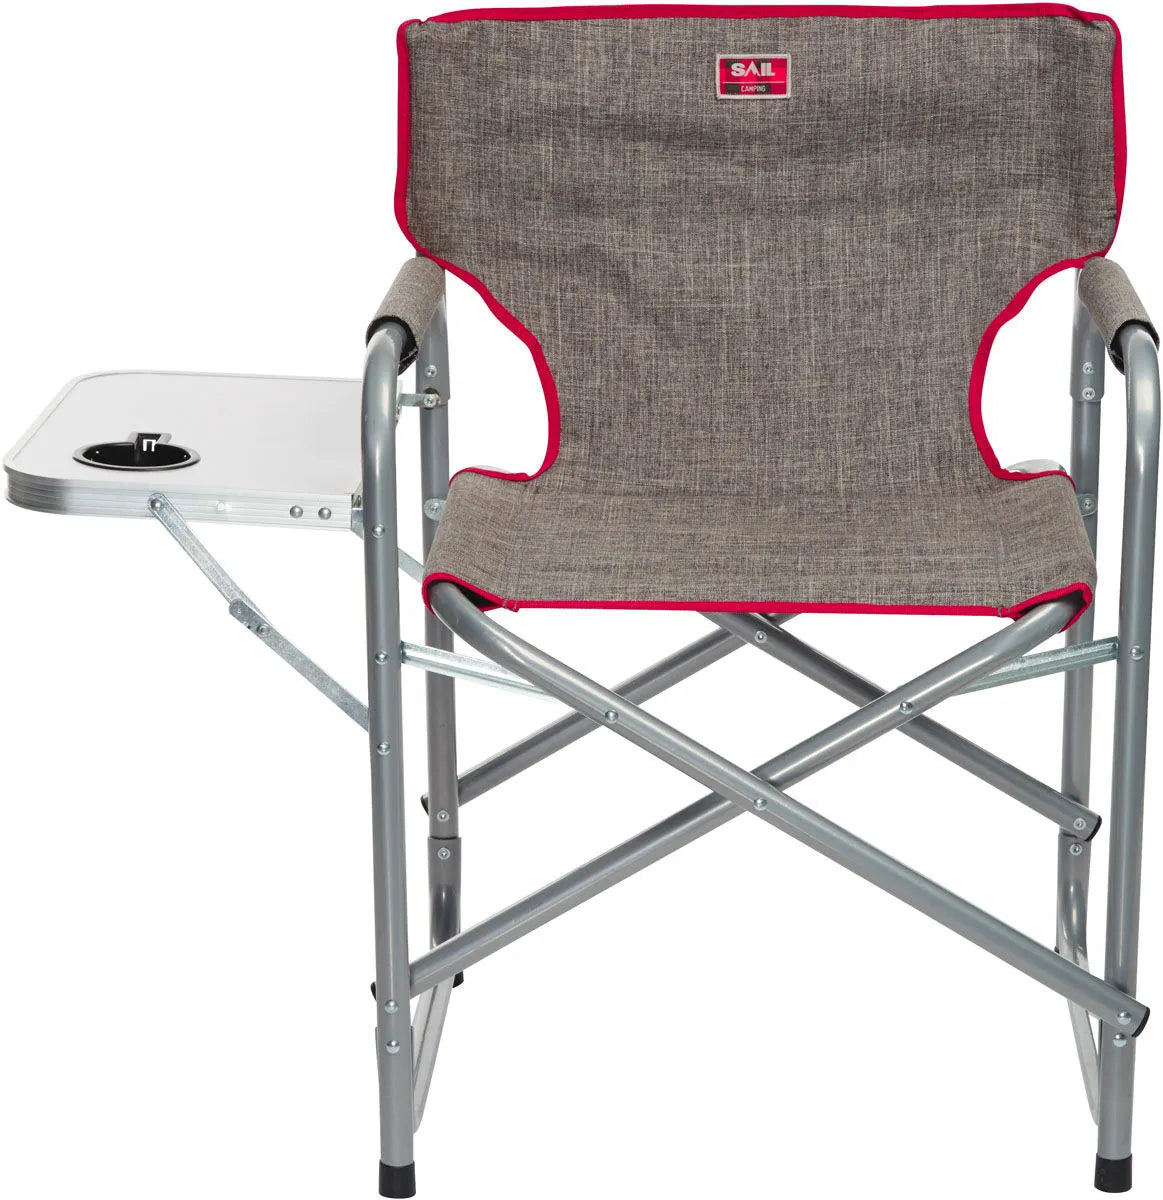 Camp Master Eco Folding Chair